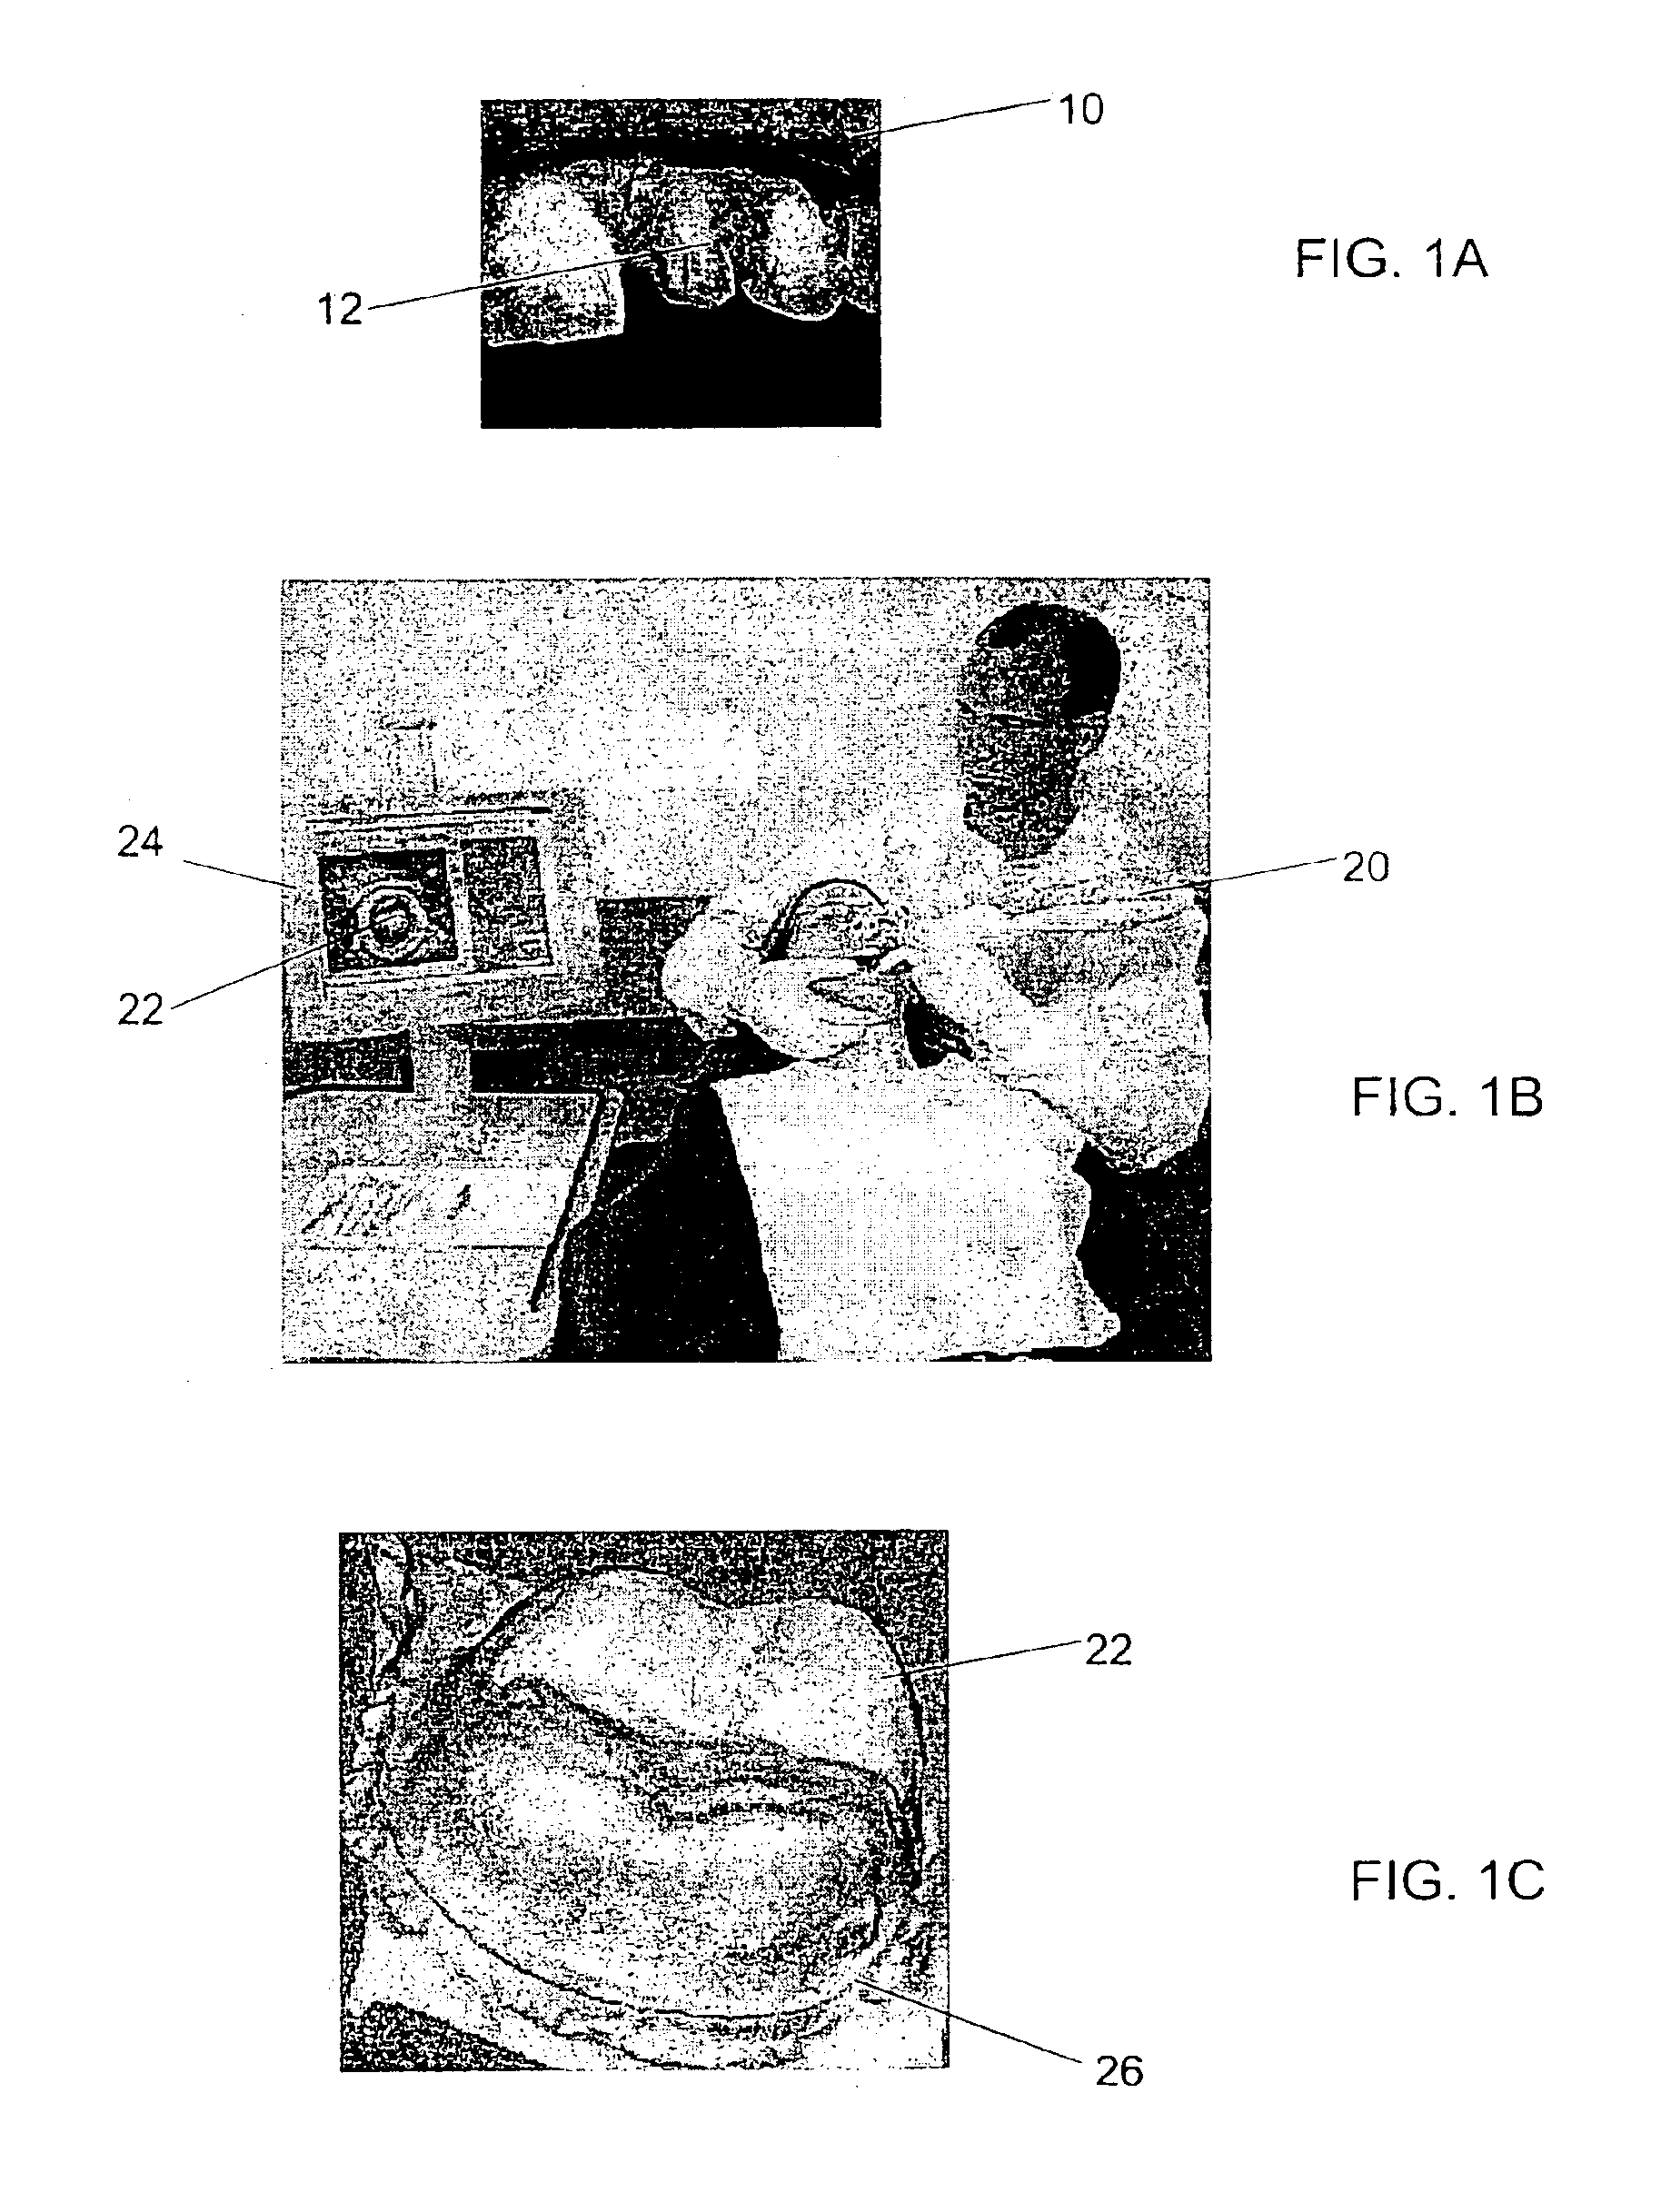 Method and system for fabricating a dental coping, and a coping fabricated thereby